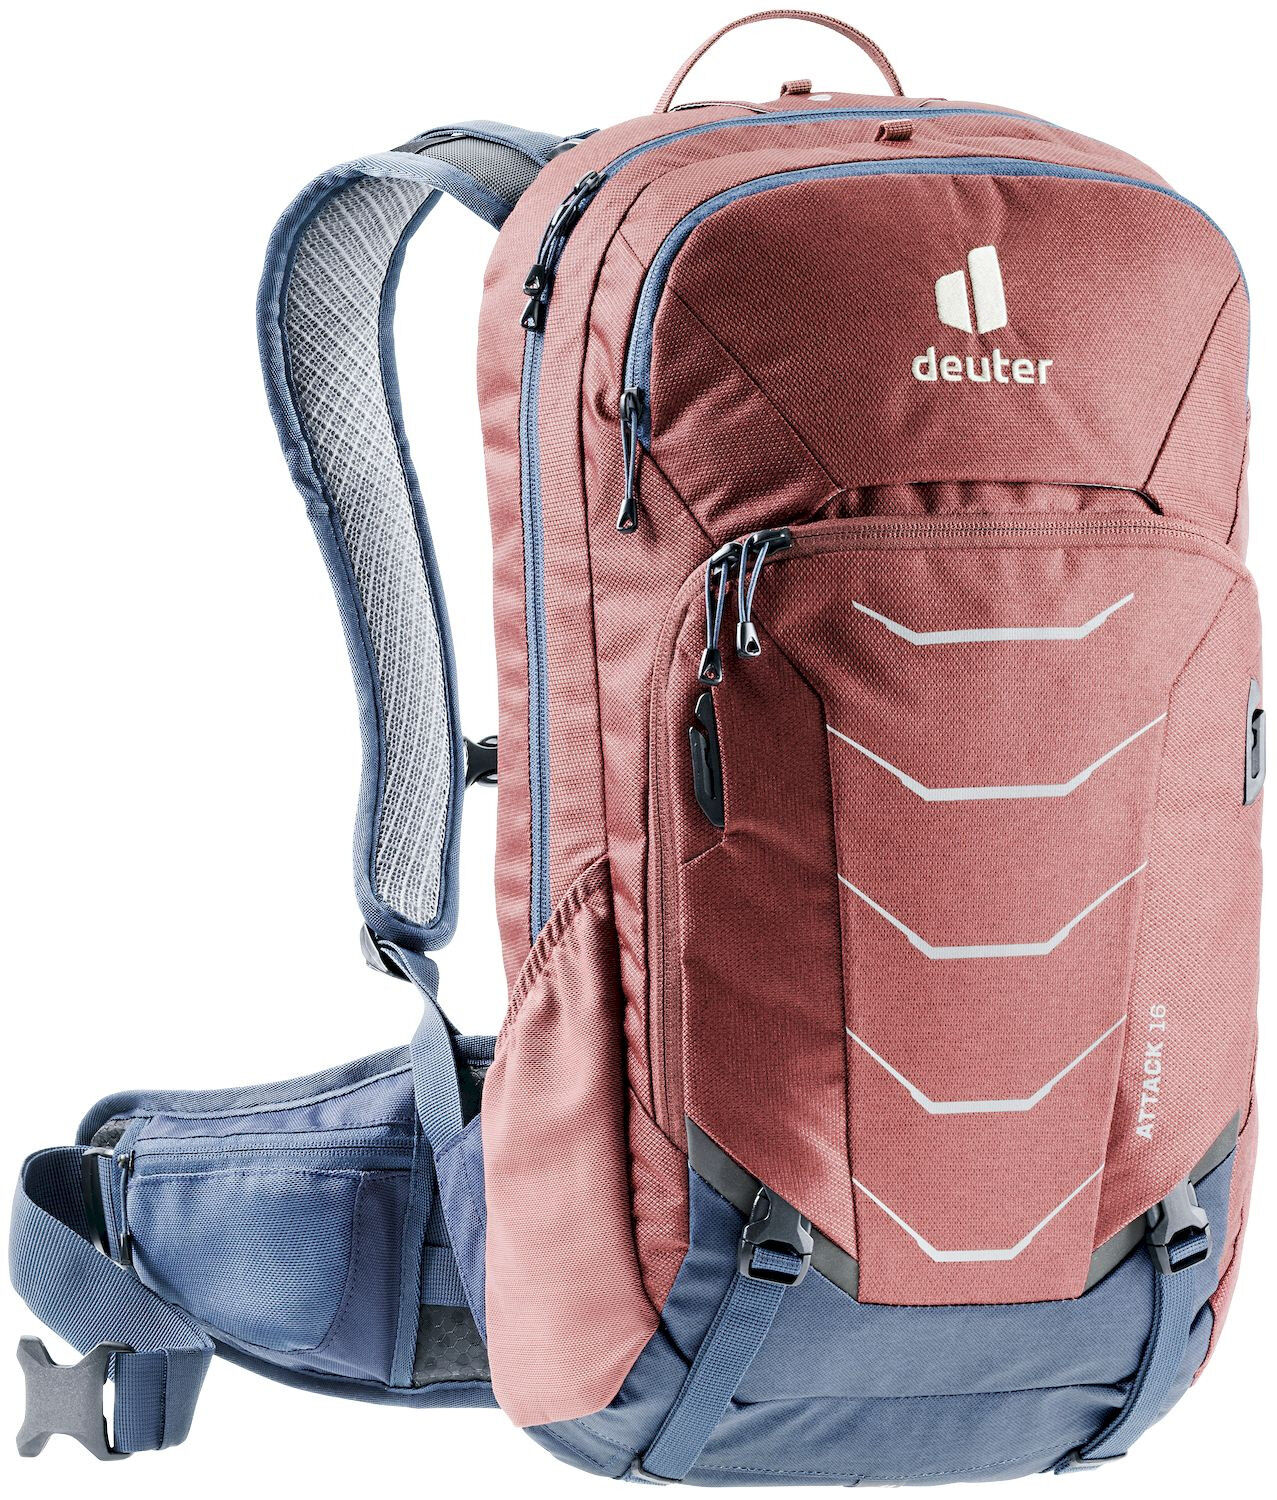 Deuter Attack 16 - Cycling backpack - Men's